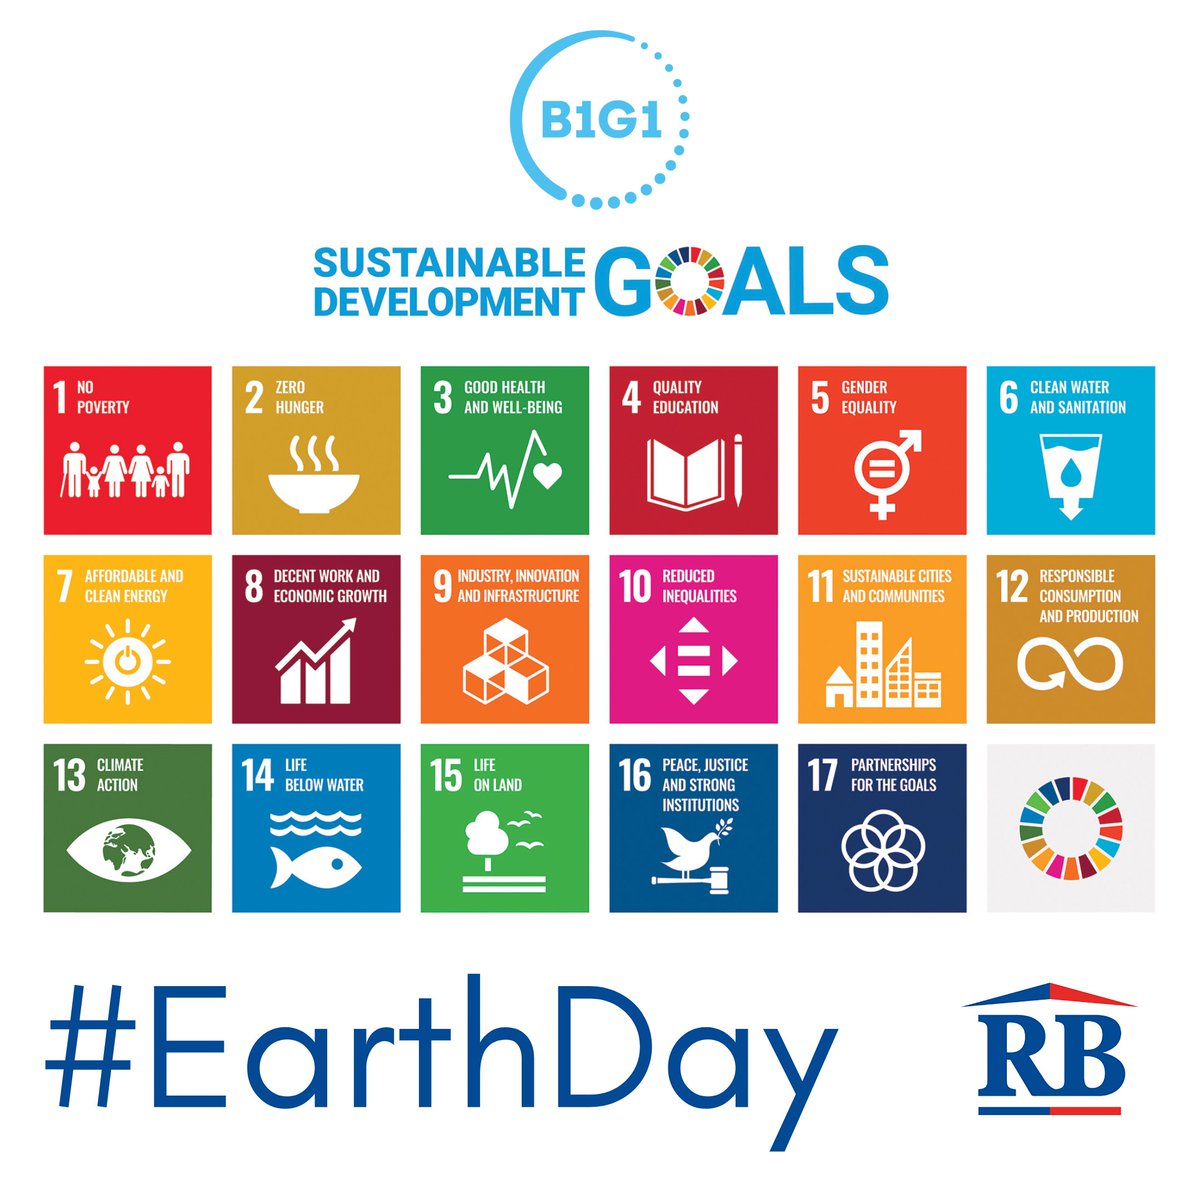 This #EarthDay we continue our close partnership with @B1G1, working towards many of their SDG's with the target of ensuring global equality and wellbeing. Find out more here. redpathbruce.co.uk/better-lives-p… #sustainablegoals #globalequality #healthandwellbeing #globalawareness